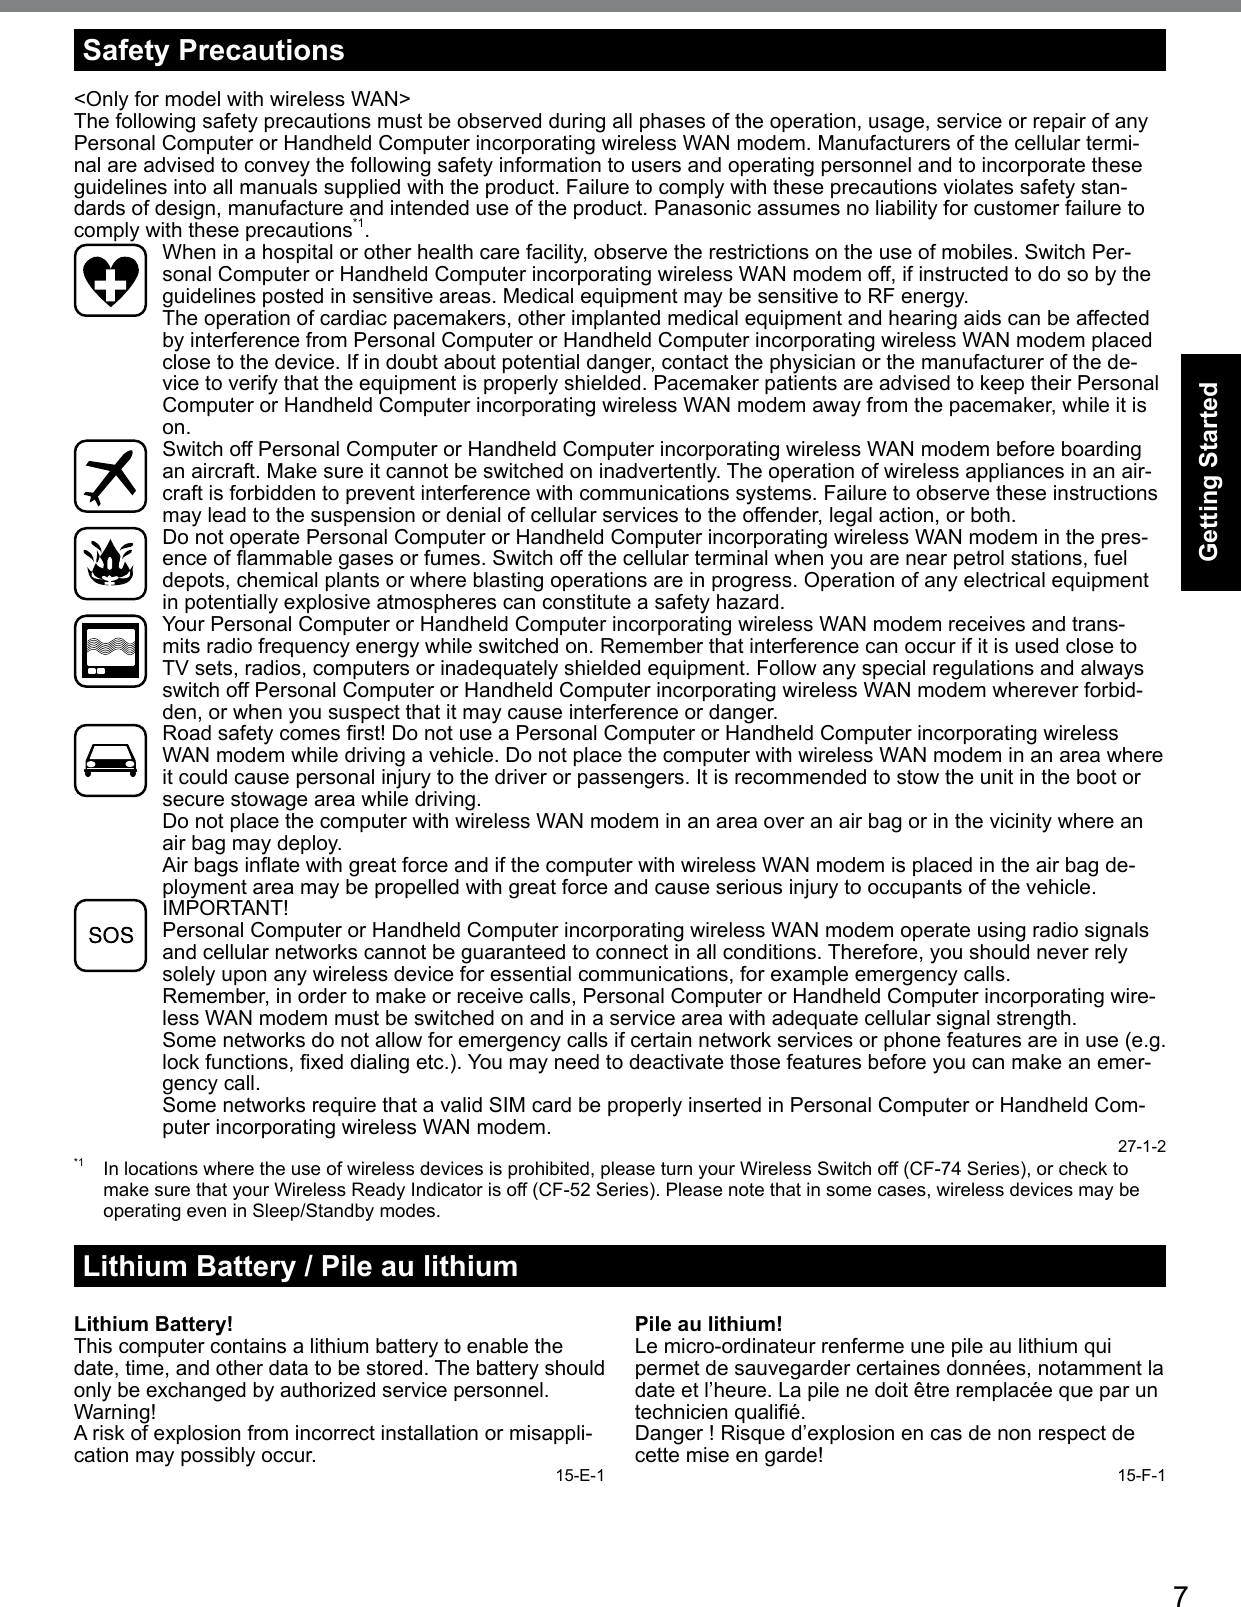 7Getting StartedSafety Precautions&lt;Only for model with wireless WAN&gt;The following safety precautions must be observed during all phases of the operation, usage, service or repair of any Personal Computer or Handheld Computer incorporating wireless WAN modem. Manufacturers of the cellular termi-nal are advised to convey the following safety information to users and operating personnel and to incorporate these guidelines into all manuals supplied with the product. Failure to comply with these precautions violates safety stan-dards of design, manufacture and intended use of the product. Panasonic assumes no liability for customer failure to comply with these precautions*1.  When in a hospital or other health care facility, observe the restrictions on the use of mobiles. Switch Per-sonal Computer or Handheld Computer incorporating wireless WAN modem off, if instructed to do so by the guidelines posted in sensitive areas. Medical equipment may be sensitive to RF energy.   The operation of cardiac pacemakers, other implanted medical equipment and hearing aids can be affected by interference from Personal Computer or Handheld Computer incorporating wireless WAN modem placed close to the device. If in doubt about potential danger, contact the physician or the manufacturer of the de-vice to verify that the equipment is properly shielded. Pacemaker patients are advised to keep their Personal Computer or Handheld Computer incorporating wireless WAN modem away from the pacemaker, while it is on.  Switch off Personal Computer or Handheld Computer incorporating wireless WAN modem before boarding an aircraft. Make sure it cannot be switched on inadvertently. The operation of wireless appliances in an air-craft is forbidden to prevent interference with communications systems. Failure to observe these instructions may lead to the suspension or denial of cellular services to the offender, legal action, or both.  Do not operate Personal Computer or Handheld Computer incorporating wireless WAN modem in the pres-enceofammablegasesorfumes.Switchoffthecellularterminalwhenyouarenearpetrolstations,fueldepots, chemical plants or where blasting operations are in progress. Operation of any electrical equipment in potentially explosive atmospheres can constitute a safety hazard.  Your Personal Computer or Handheld Computer incorporating wireless WAN modem receives and trans-mits radio frequency energy while switched on. Remember that interference can occur if it is used close to TV sets, radios, computers or inadequately shielded equipment. Follow any special regulations and always switch off Personal Computer or Handheld Computer incorporating wireless WAN modem wherever forbid-den, or when you suspect that it may cause interference or danger. Roadsafetycomesrst!DonotuseaPersonalComputerorHandheldComputerincorporatingwirelessWAN modem while driving a vehicle. Do not place the computer with wireless WAN modem in an area where it could cause personal injury to the driver or passengers. It is recommended to stow the unit in the boot or secure stowage area while driving.   Do not place the computer with wireless WAN modem in an area over an air bag or in the vicinity where an air bag may deploy.  AirbagsinatewithgreatforceandifthecomputerwithwirelessWANmodemisplacedintheairbagde-ployment area may be propelled with great force and cause serious injury to occupants of the vehicle. IMPORTANT! Personal Computer or Handheld Computer incorporating wireless WAN modem operate using radio signals and cellular networks cannot be guaranteed to connect in all conditions. Therefore, you should never rely solely upon any wireless device for essential communications, for example emergency calls.Remember, in order to make or receive calls, Personal Computer or Handheld Computer incorporating wire-less WAN modem must be switched on and in a service area with adequate cellular signal strength.Some networks do not allow for emergency calls if certain network services or phone features are in use (e.g. lockfunctions,xeddialingetc.).Youmayneedtodeactivatethosefeaturesbeforeyoucanmakeanemer-gency call.Some networks require that a valid SIM card be properly inserted in Personal Computer or Handheld Com-puter incorporating wireless WAN modem. 27-1-2*1  In locations where the use of wireless devices is prohibited, please turn your Wireless Switch off (CF-74 Series), or check to make sure that your Wireless Ready Indicator is off (CF-52 Series). Please note that in some cases, wireless devices may be operating even in Sleep/Standby modes.Lithium Battery / Pile au lithiumLithium Battery!This computer contains a lithium battery to enable the date, time, and other data to be stored. The battery should only be exchanged by authorized service personnel.Warning!A risk of explosion from incorrect installation or misappli-cation may possibly occur. 15-E-1Pile au lithium!Le micro-ordinateur renferme une pile au lithium qui permet de sauvegarder certaines données, notamment la date et l’heure. La pile ne doit être remplacée que par un technicienqualié.Danger!Risqued’explosionencasdenonrespectdecettemiseengarde! 15-F-1